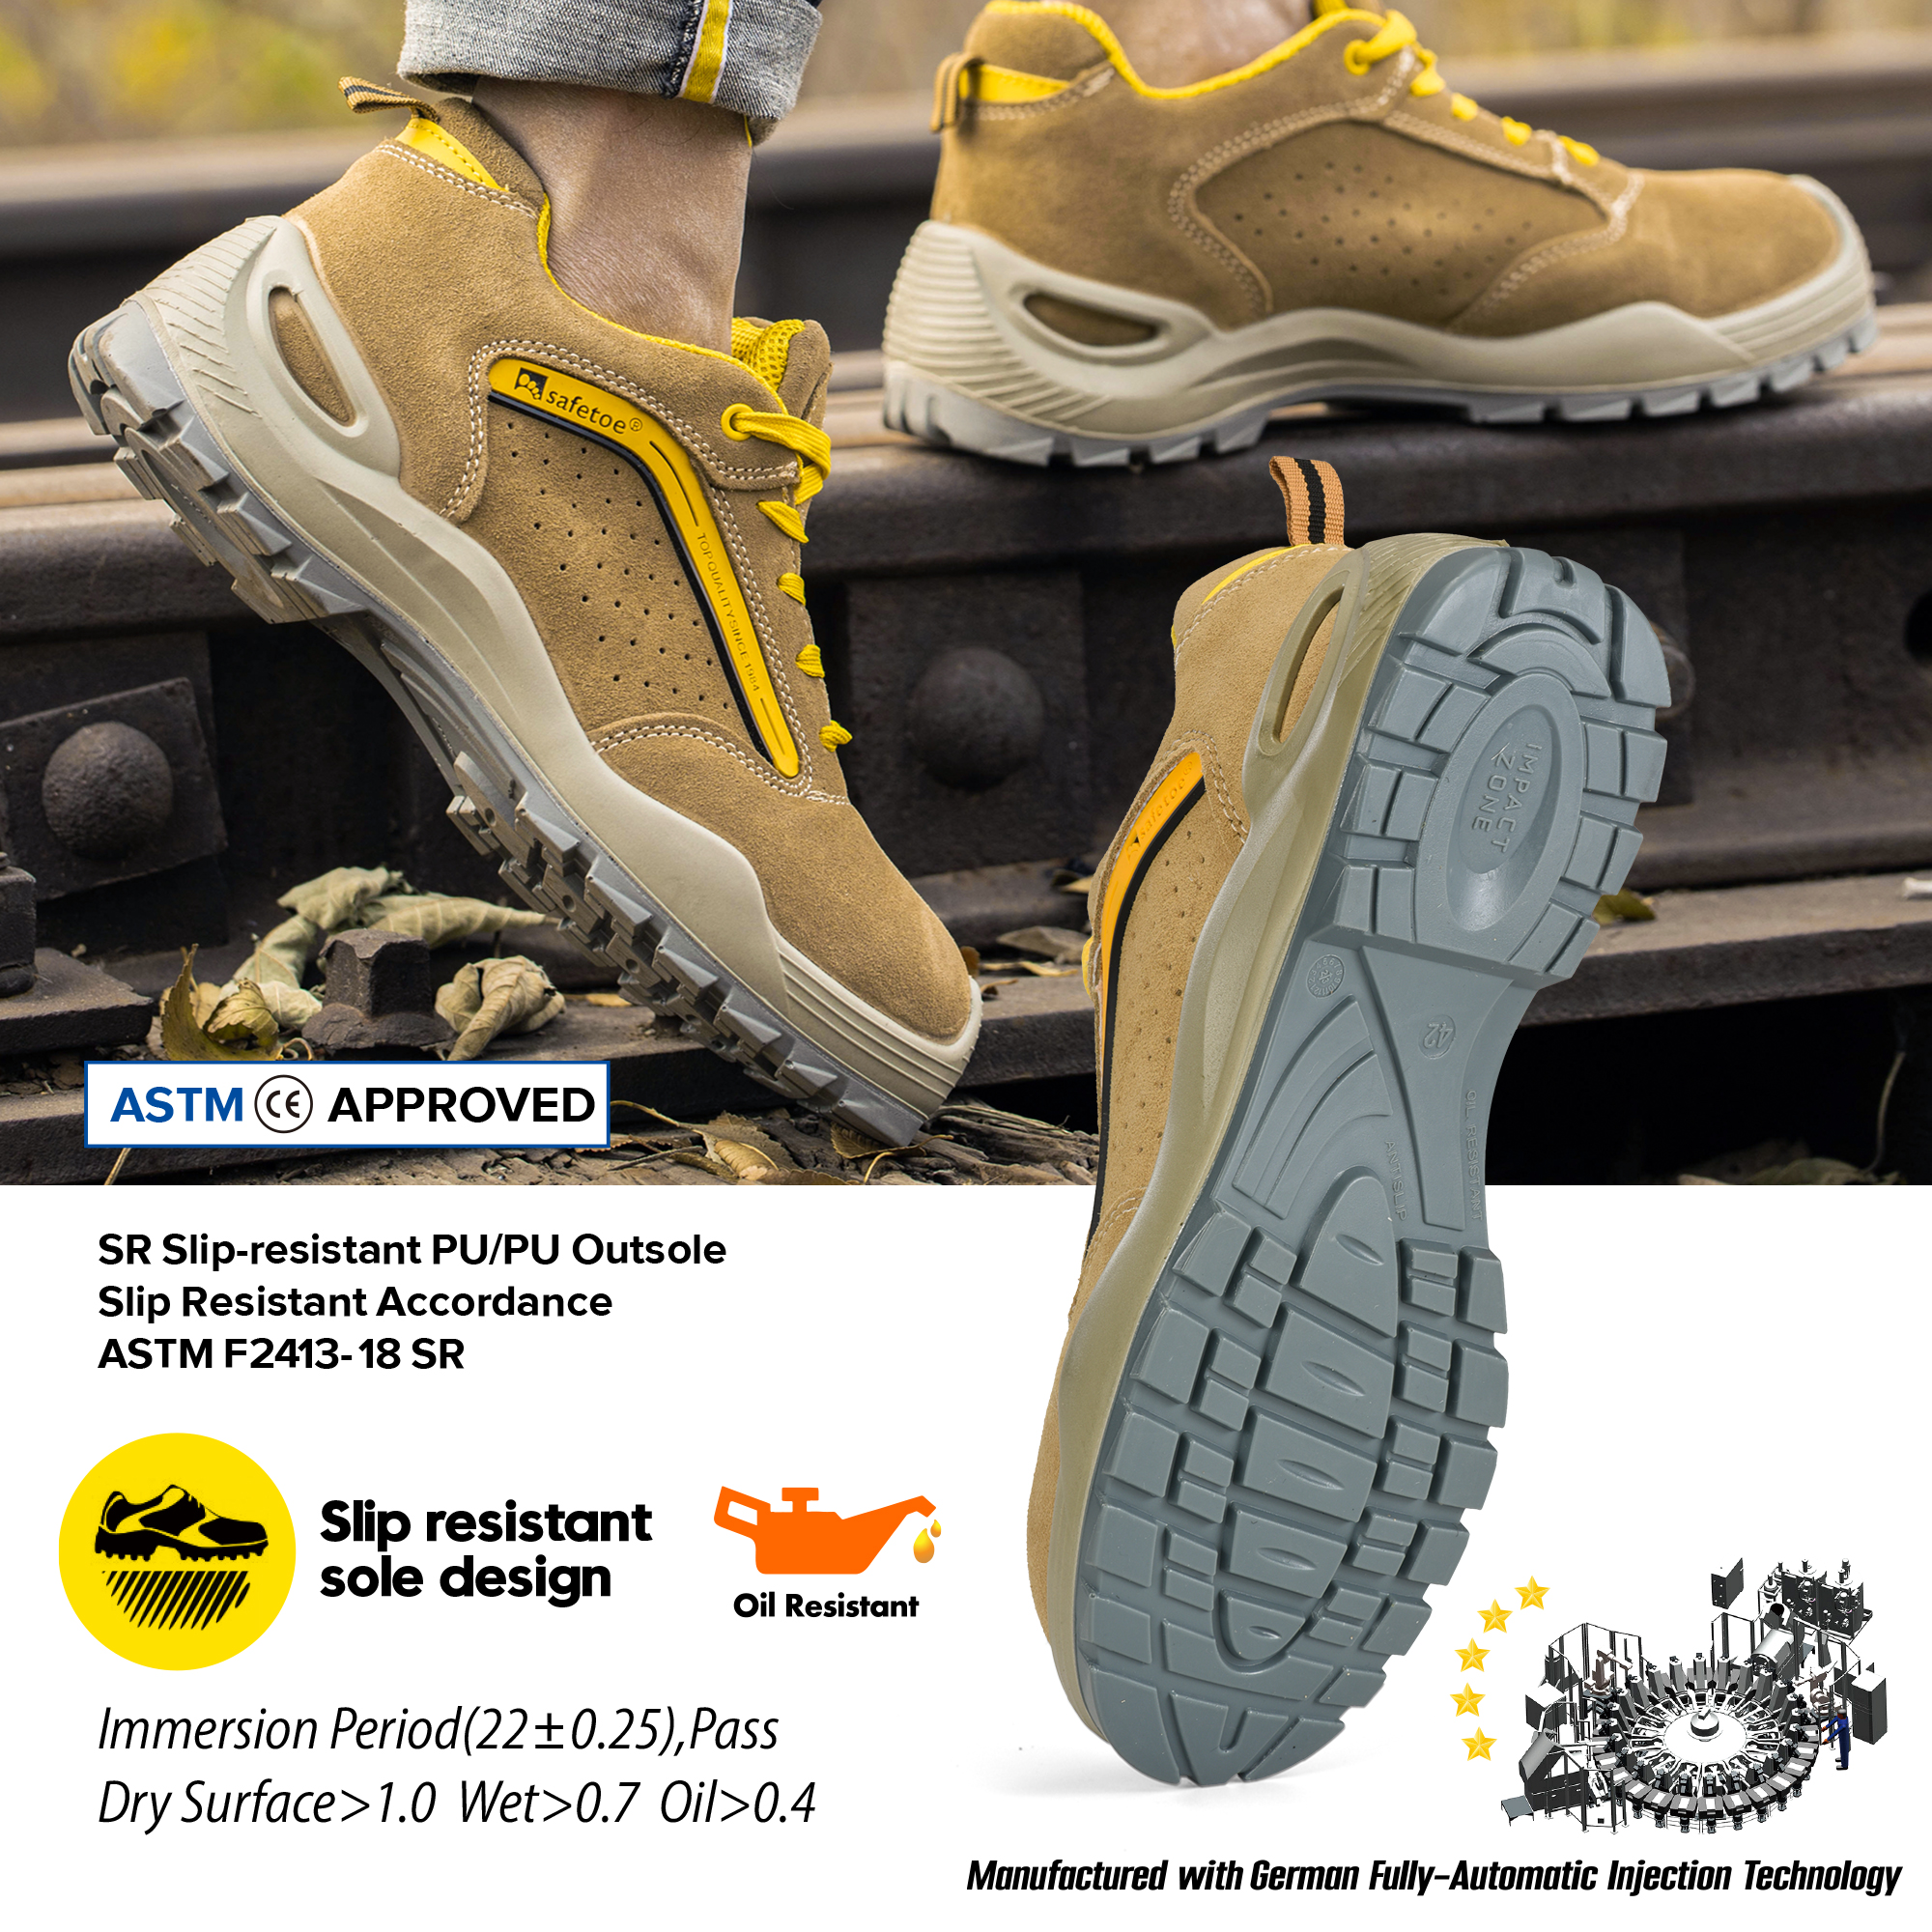 Breathable Summer Safety Shoes L-7296